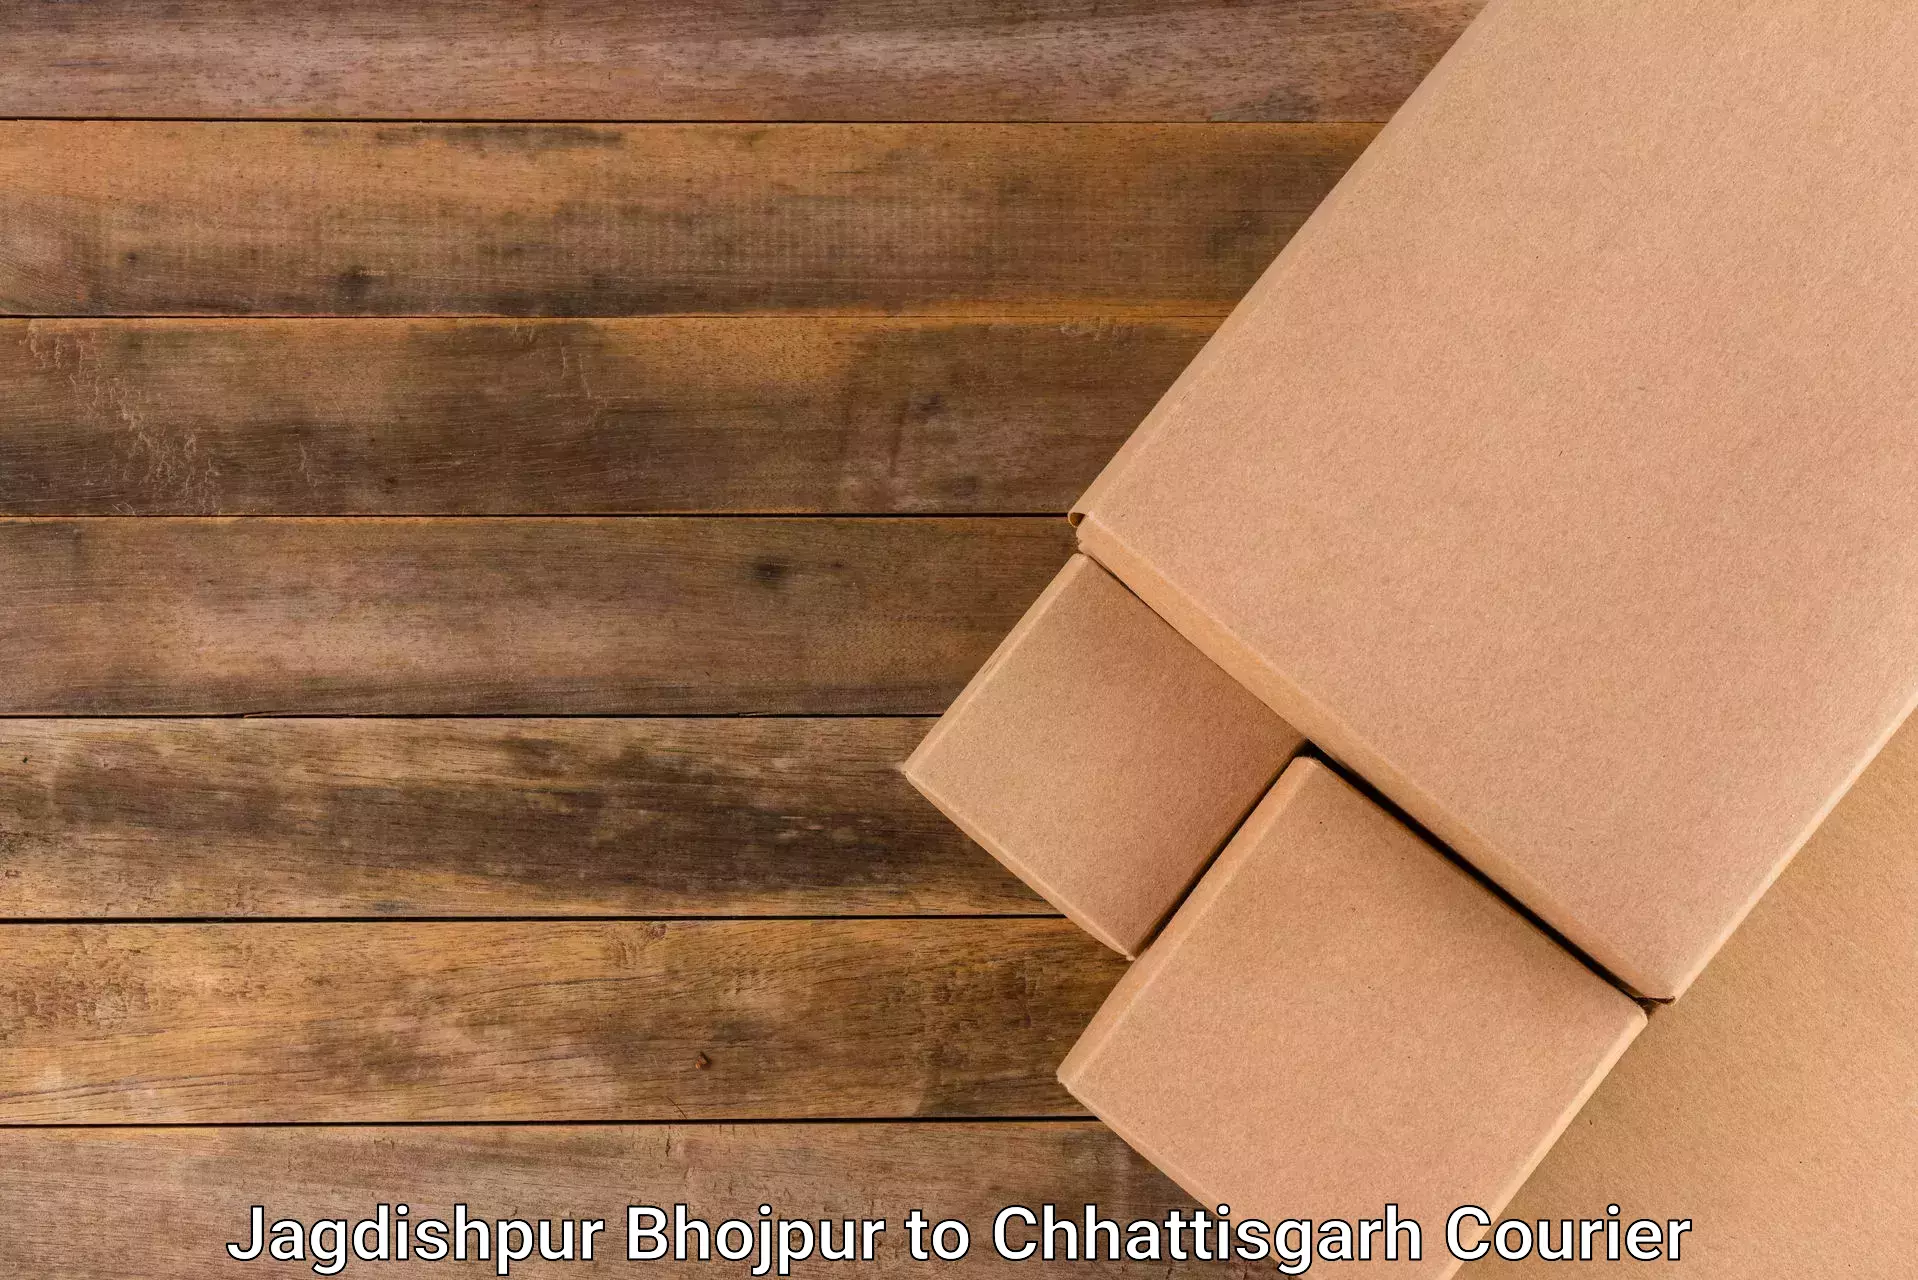 High-priority parcel service in Jagdishpur Bhojpur to Charama